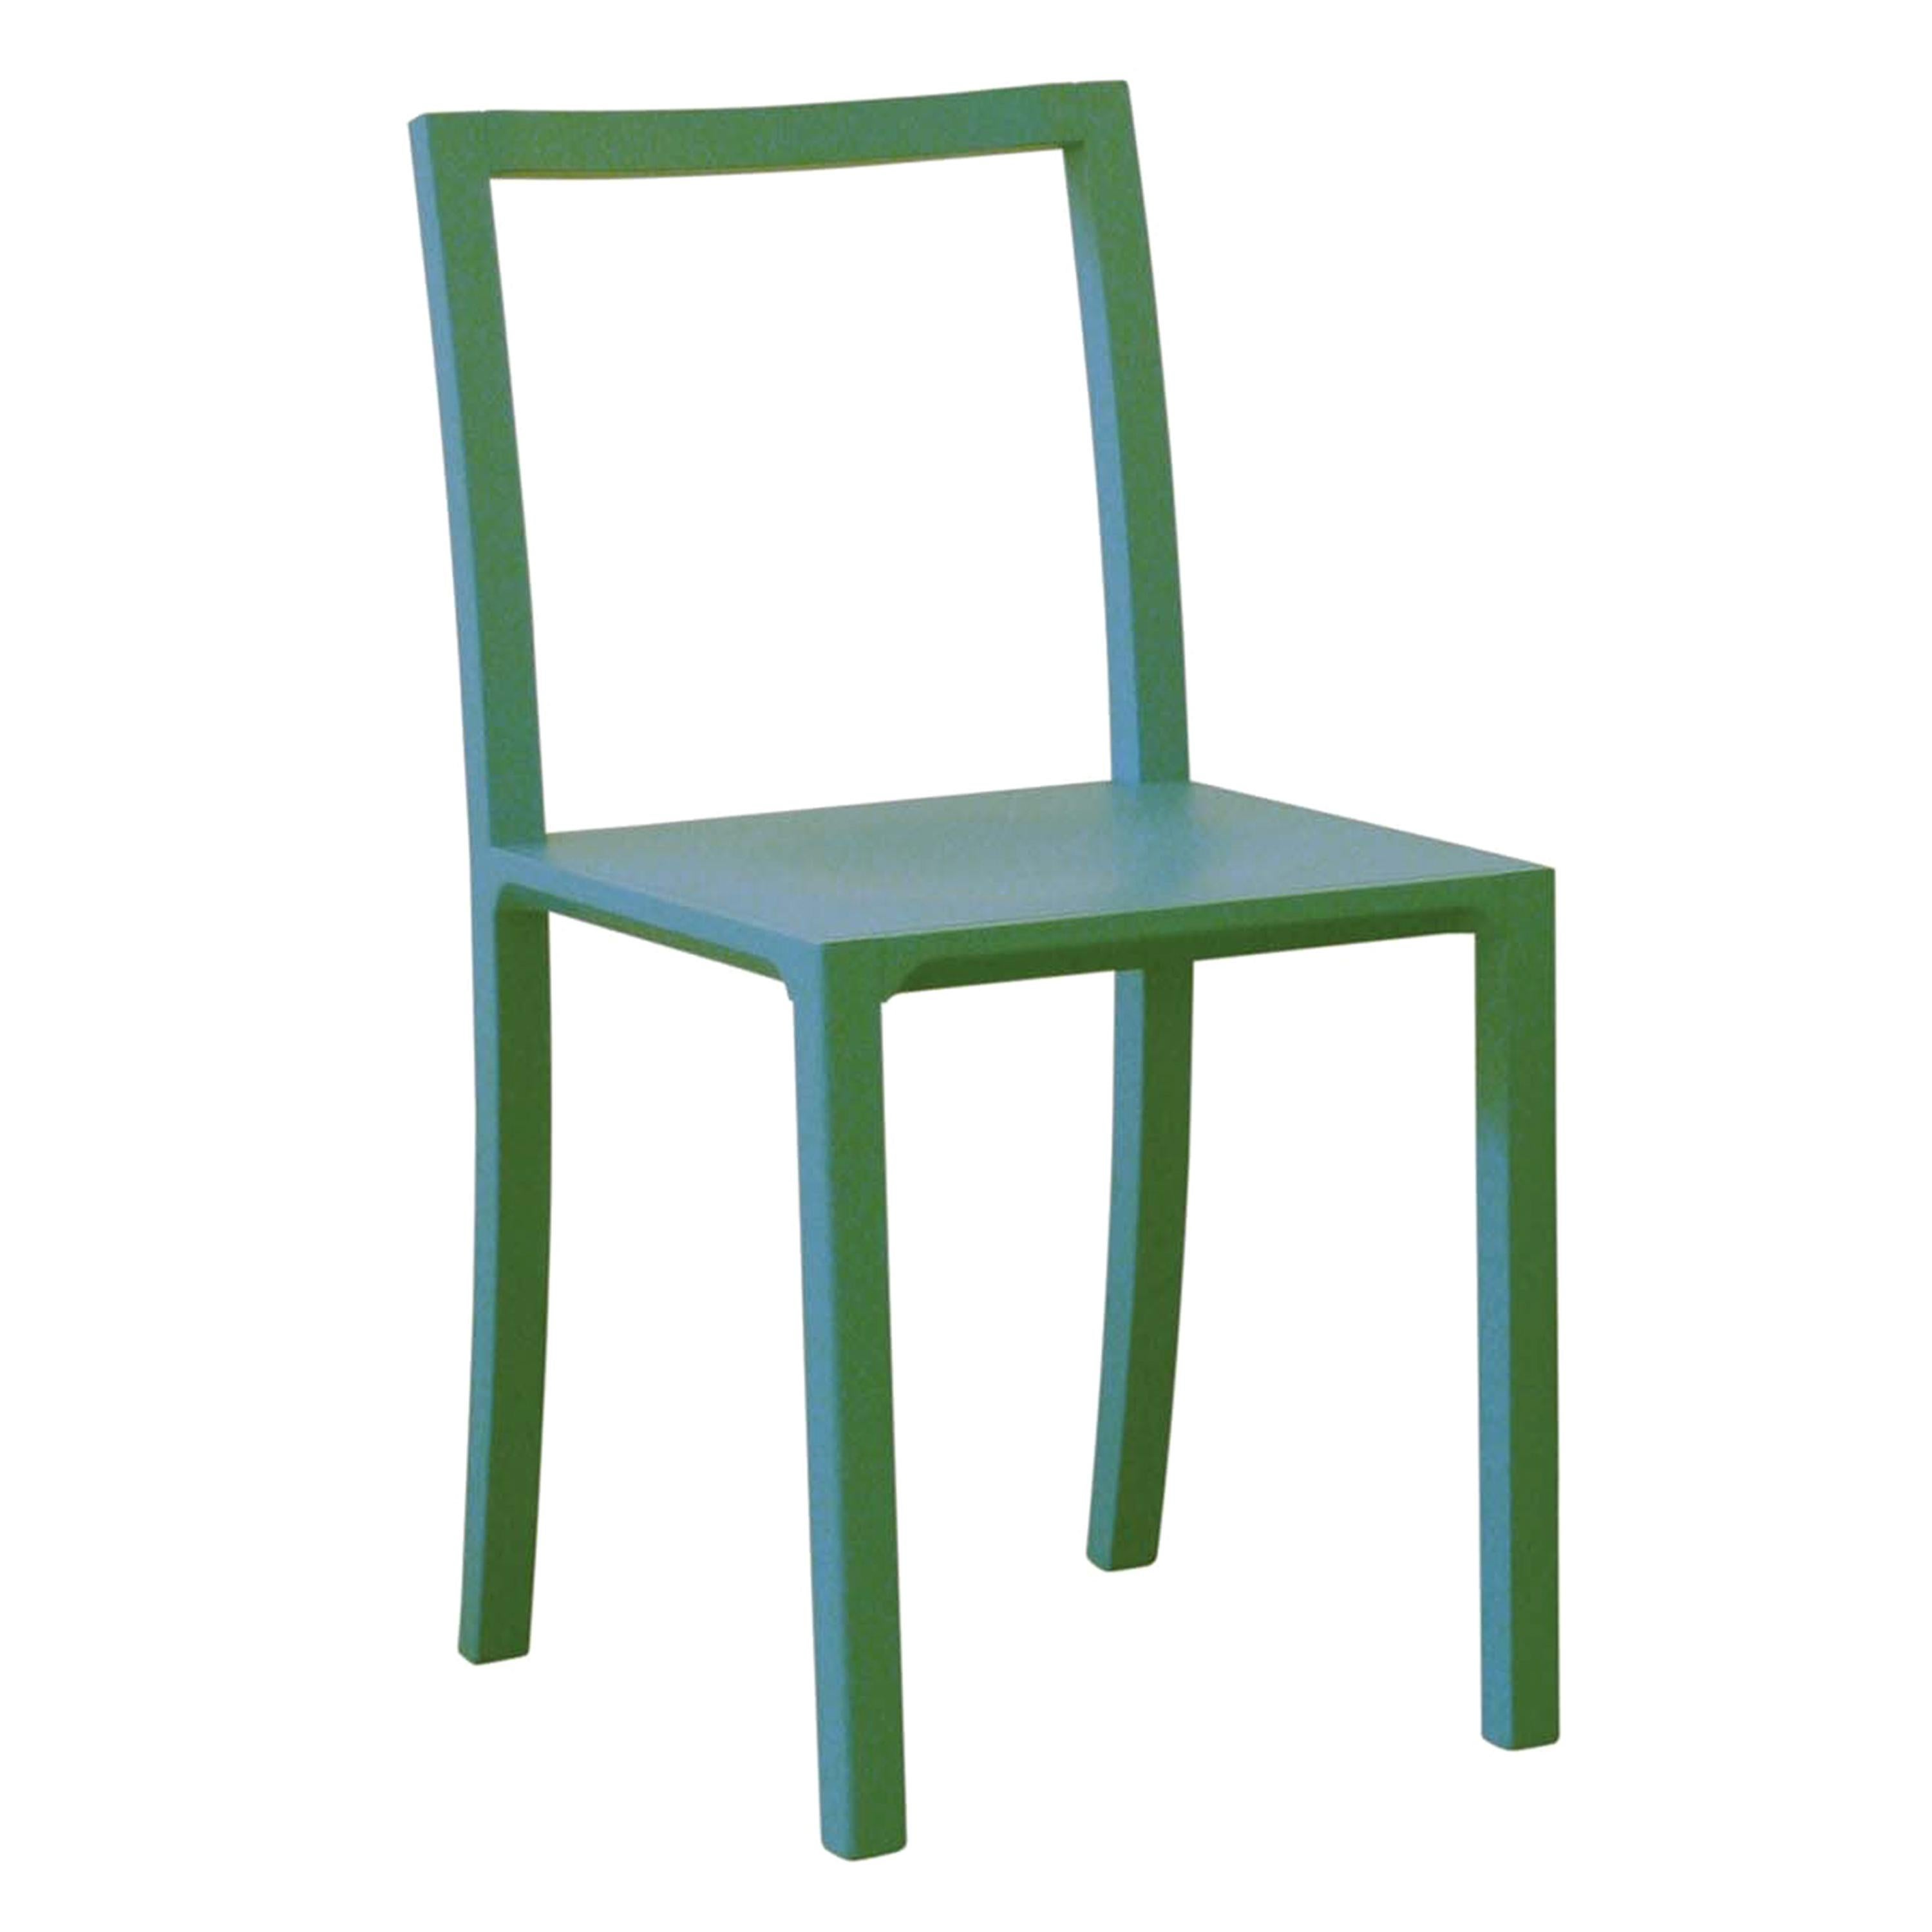 Framework Set of 2 Green Chairs by Steffen Kehrle